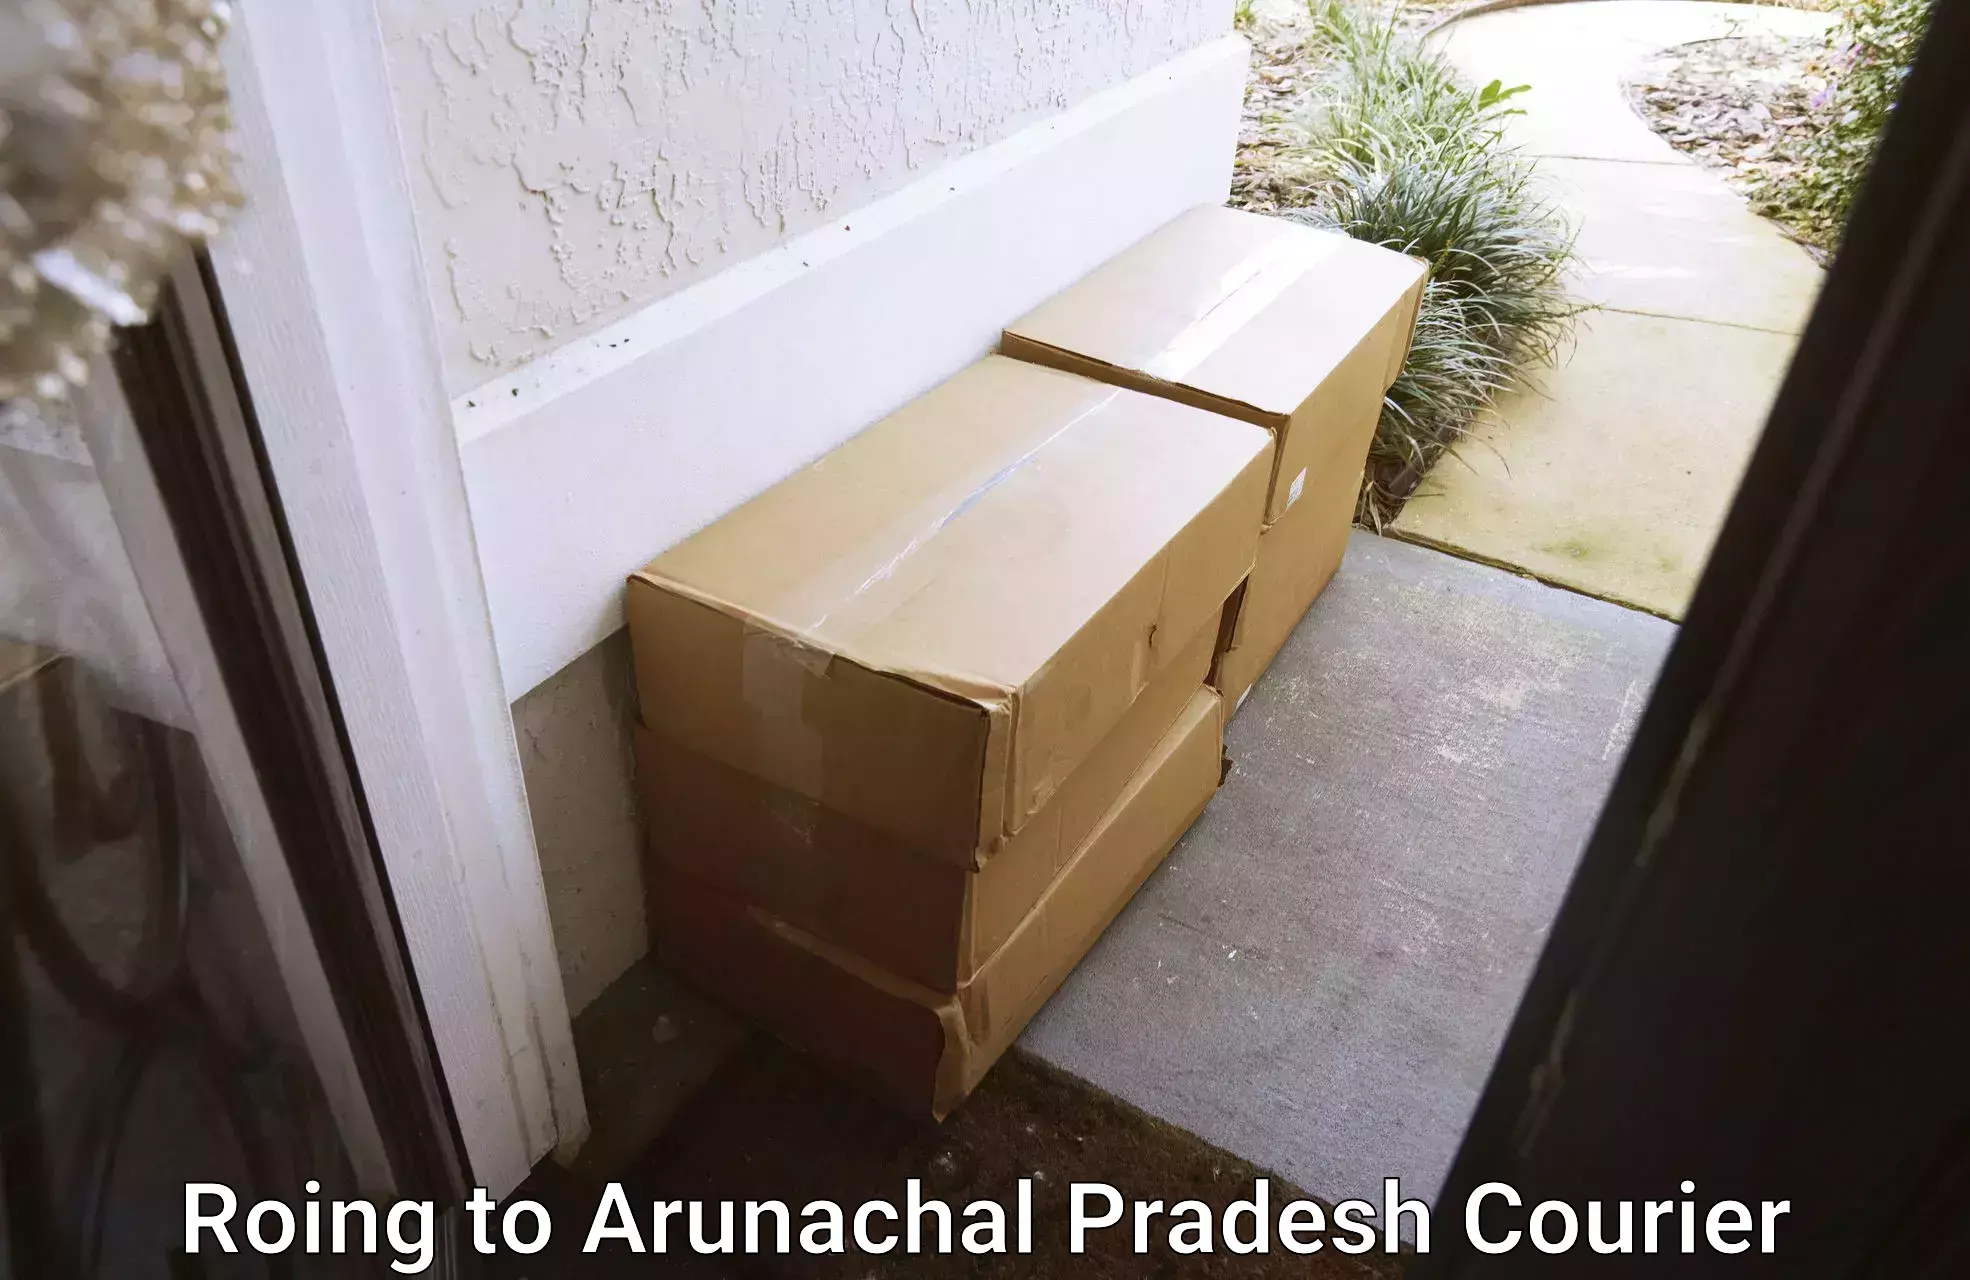 Parcel service for businesses Roing to Arunachal Pradesh